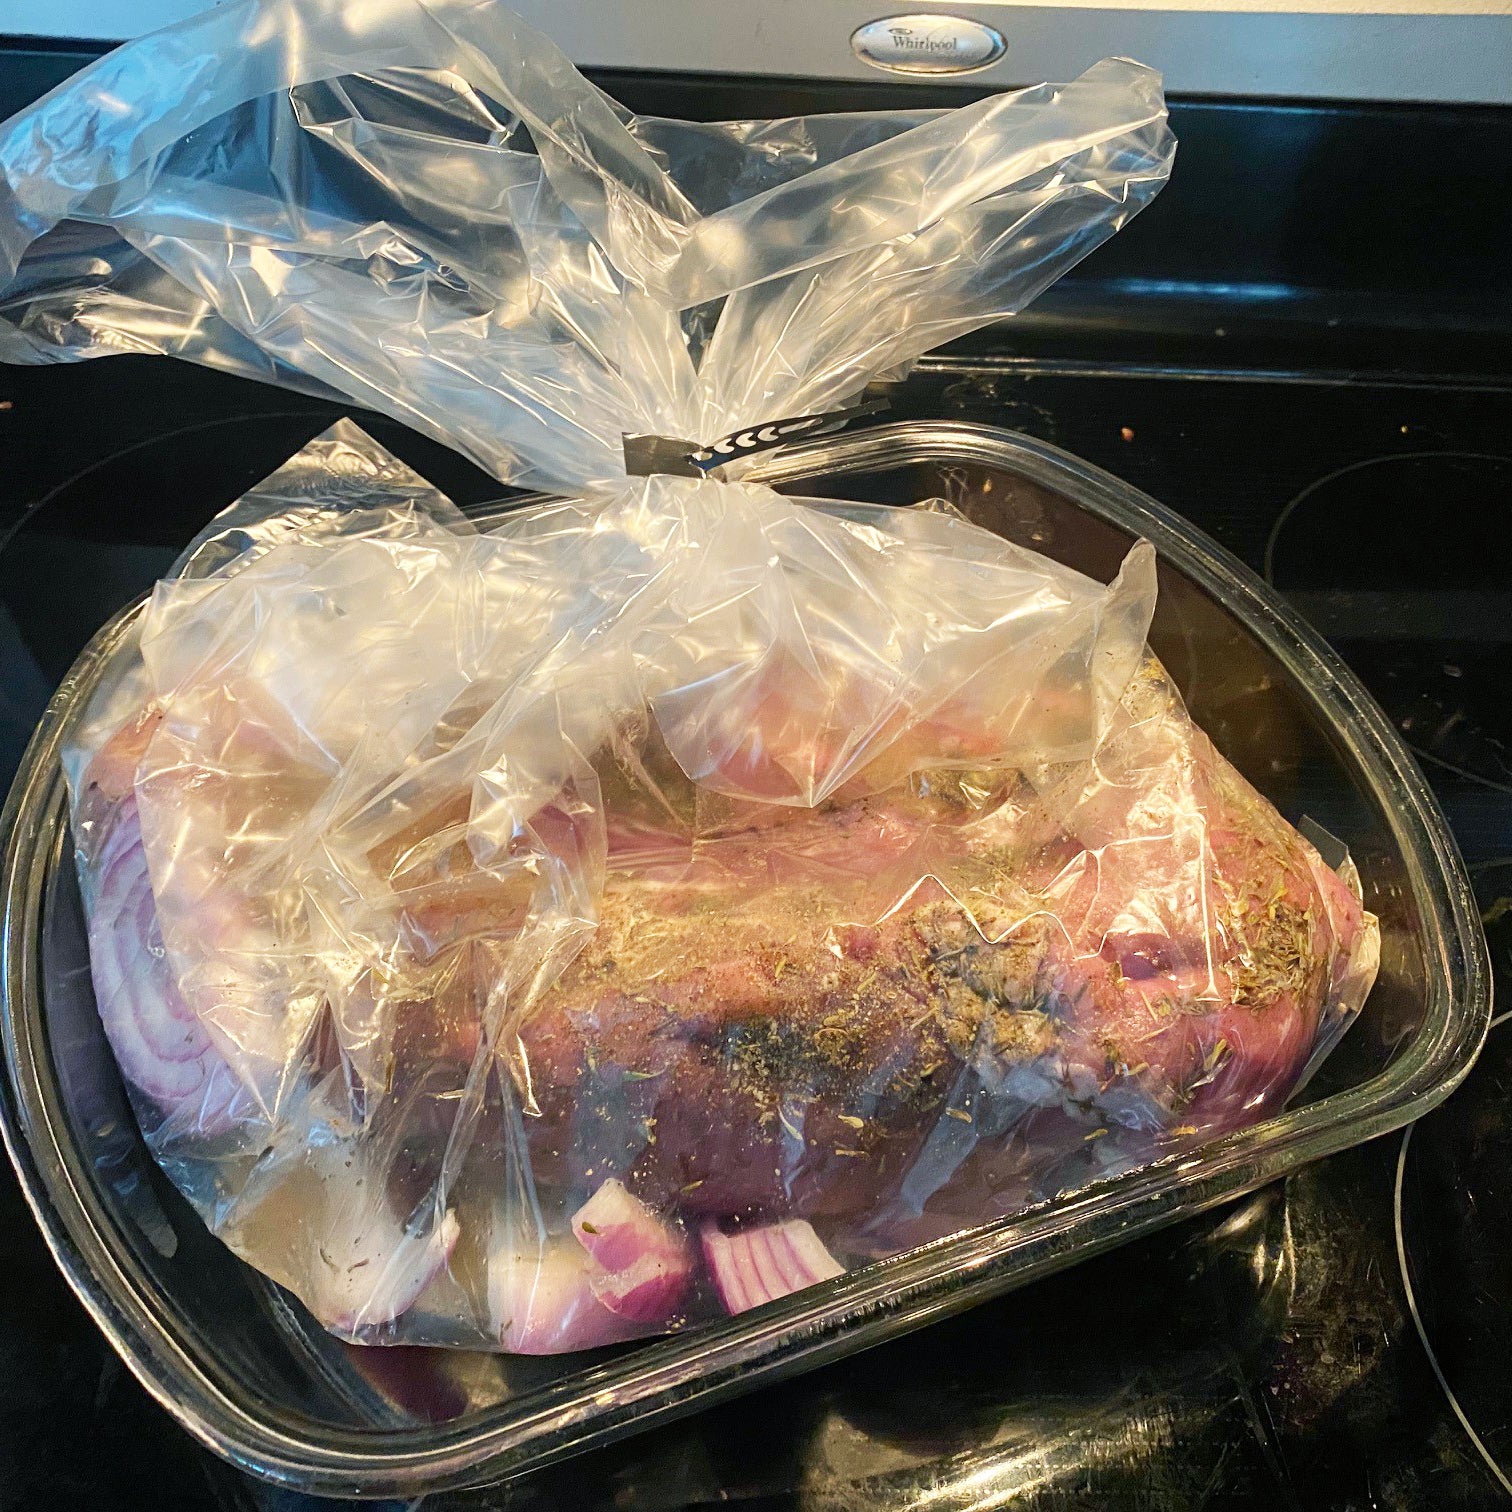 Cooking in an Oven Bag